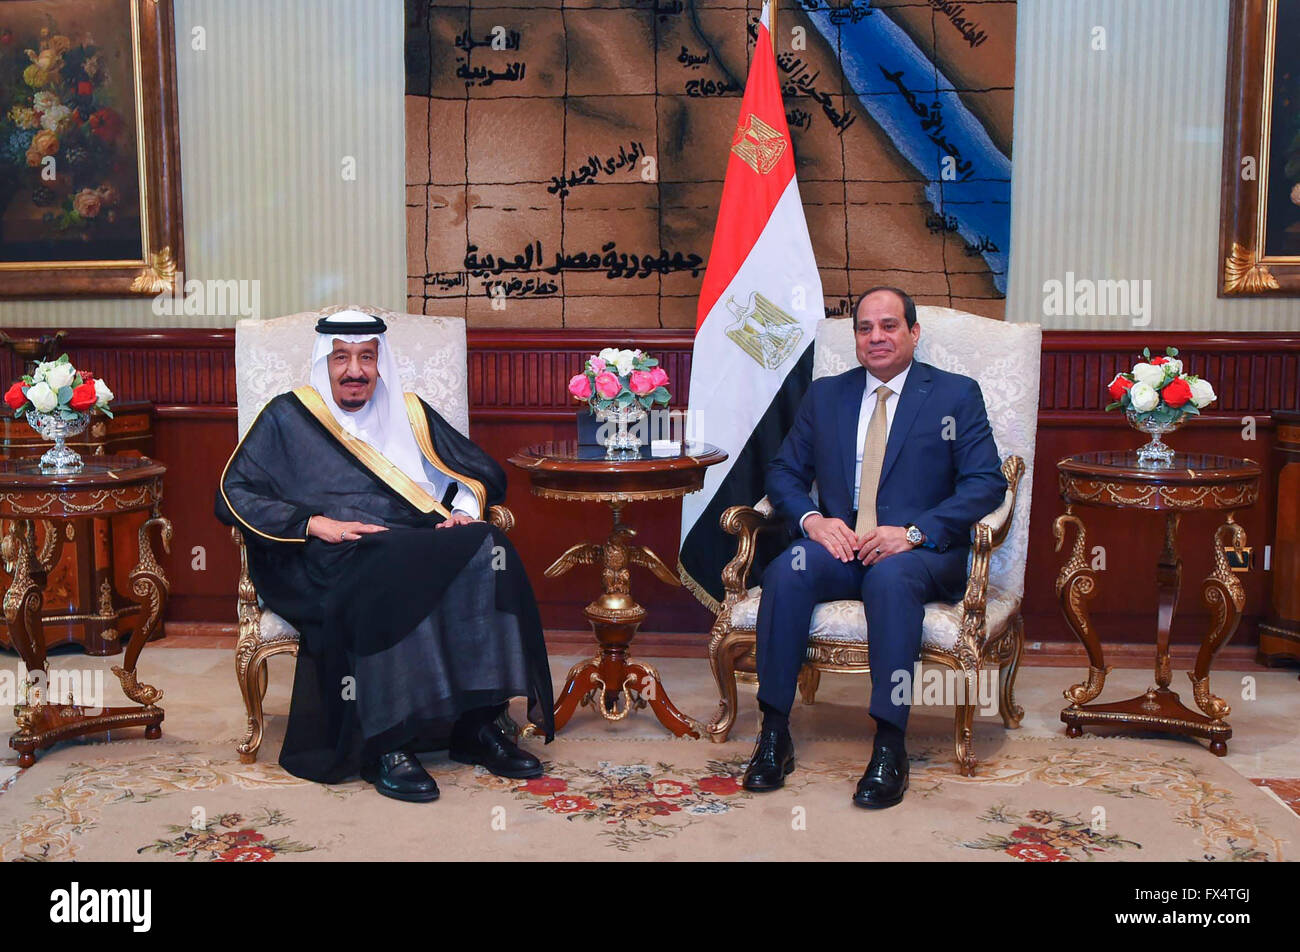 Cairo, Egypt. 11th April 2016. Saudi Arabia's King Salman at the end of an official 5-day state visit to Egypt meets with Egypt's President El-Sisi.  They signed a number of agreements, including building a bridge across the Red Sea to link the two countries, also linking Asia and Africa.  It was also announced that the sovereignty of two Red Sea islands at the mouth of the Gulf of Aqaba in the Red Sea, Tiran and Sanafir, were officially transferred to Saudi Arabia from Egypt. Credit:  Egyptian Presidency Handout Photo/Barry Iverson/Alamy Live News Stock Photo